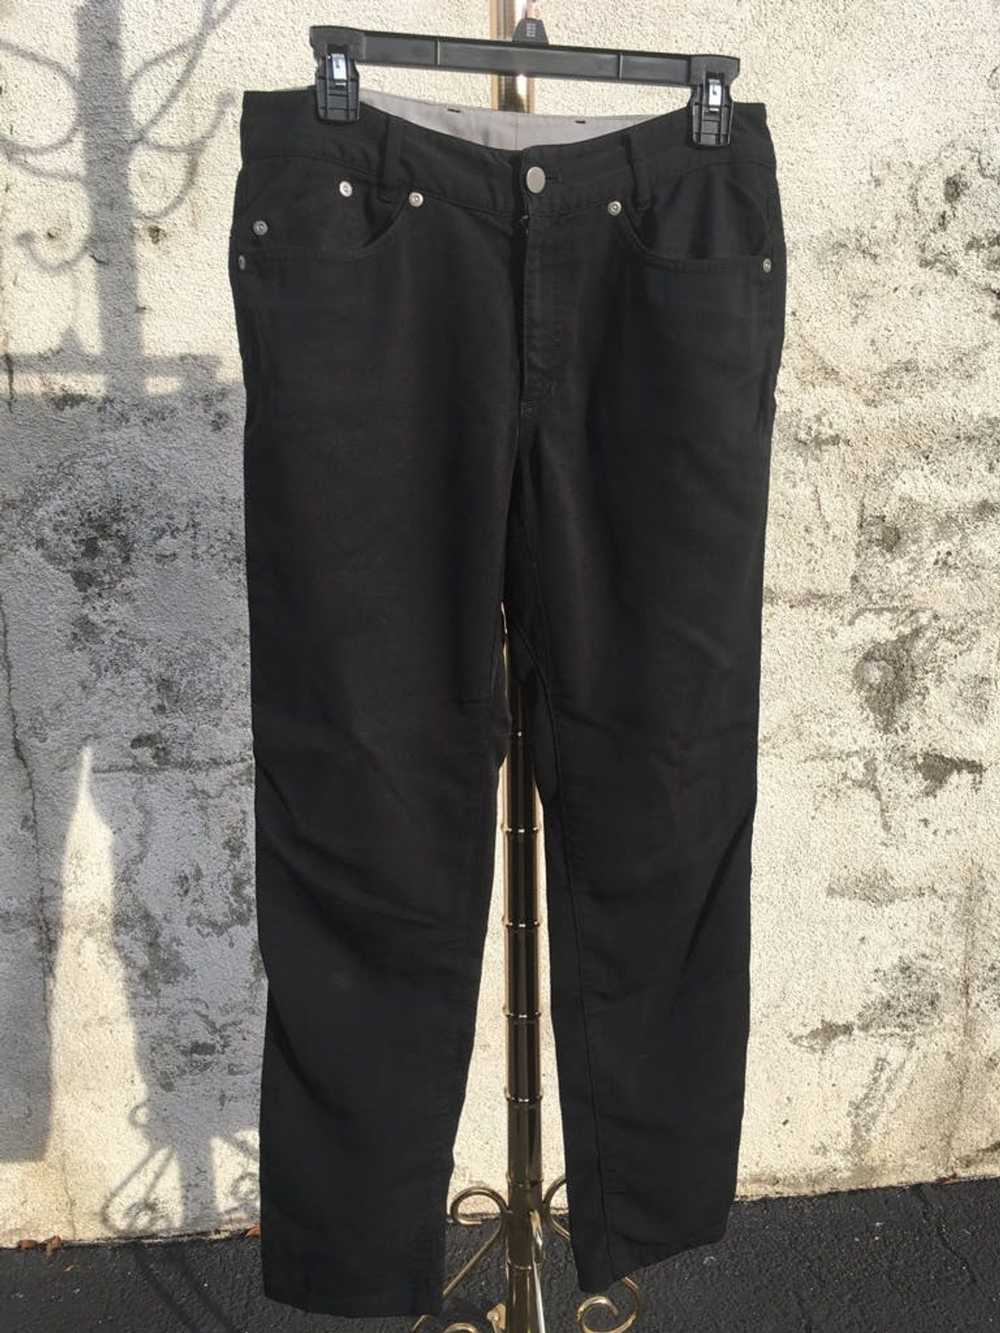 Outlier Slim Dungarees - image 1